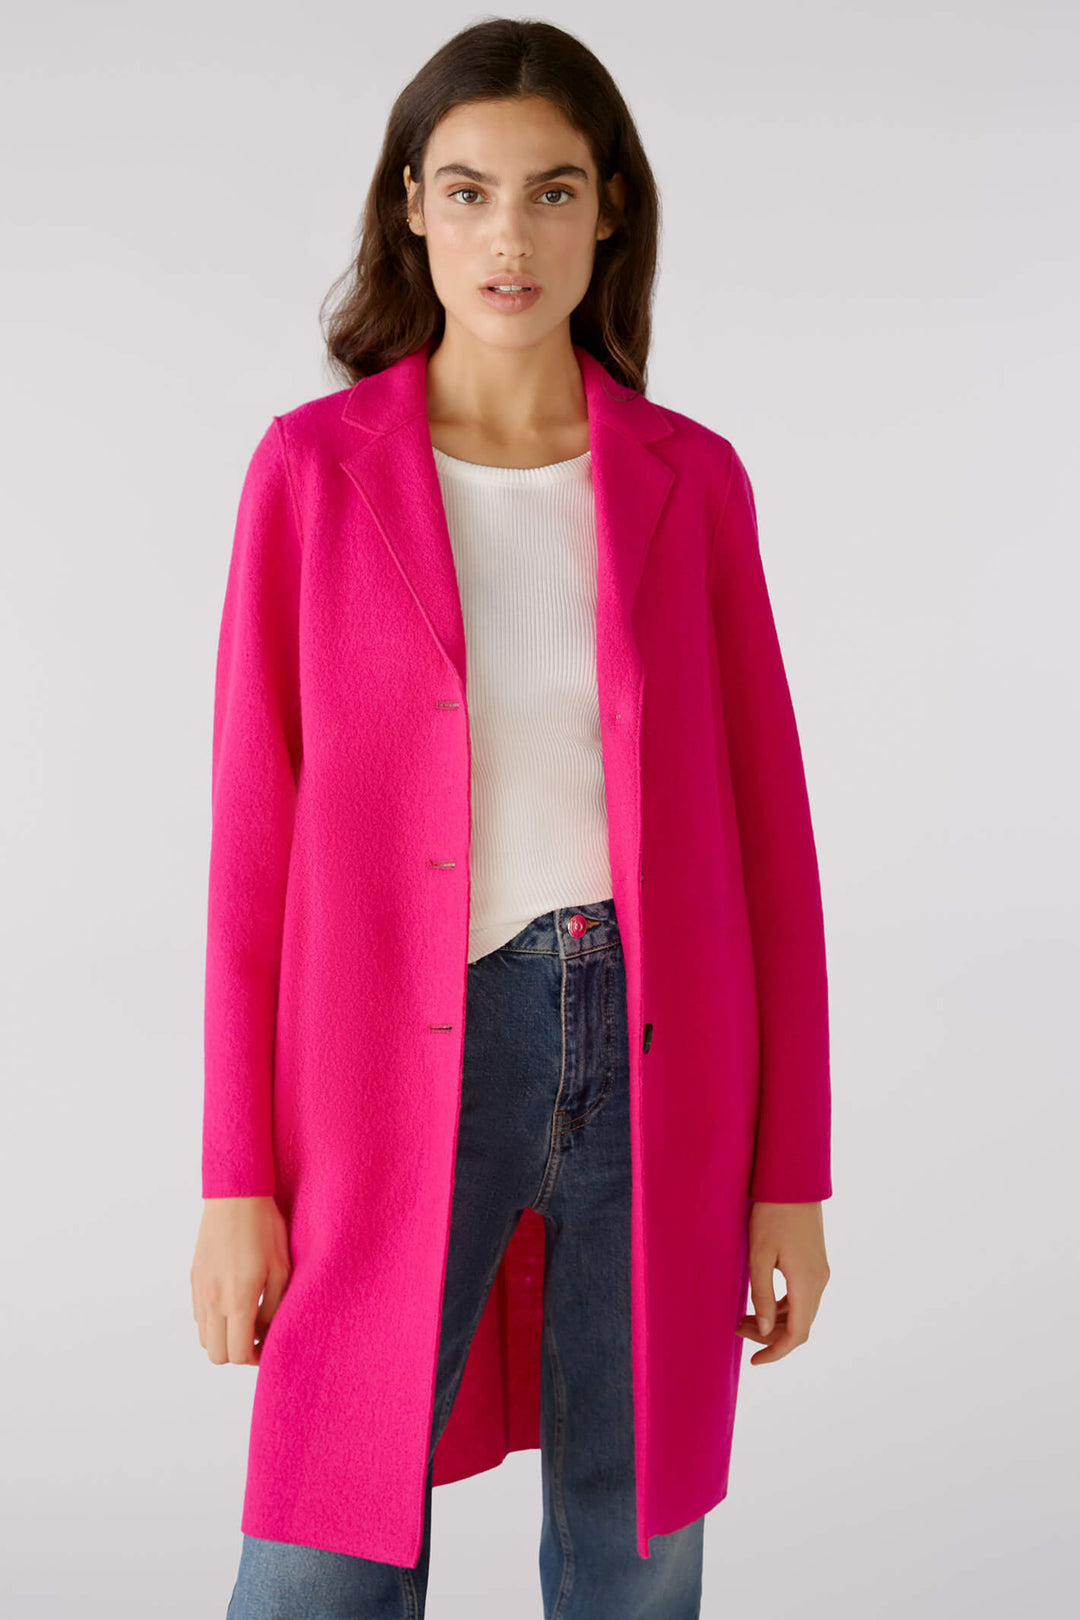 Oui 79918 3394 Mayson Pink Button Front Boiled Wool Coat - Shirley Allum Boutique